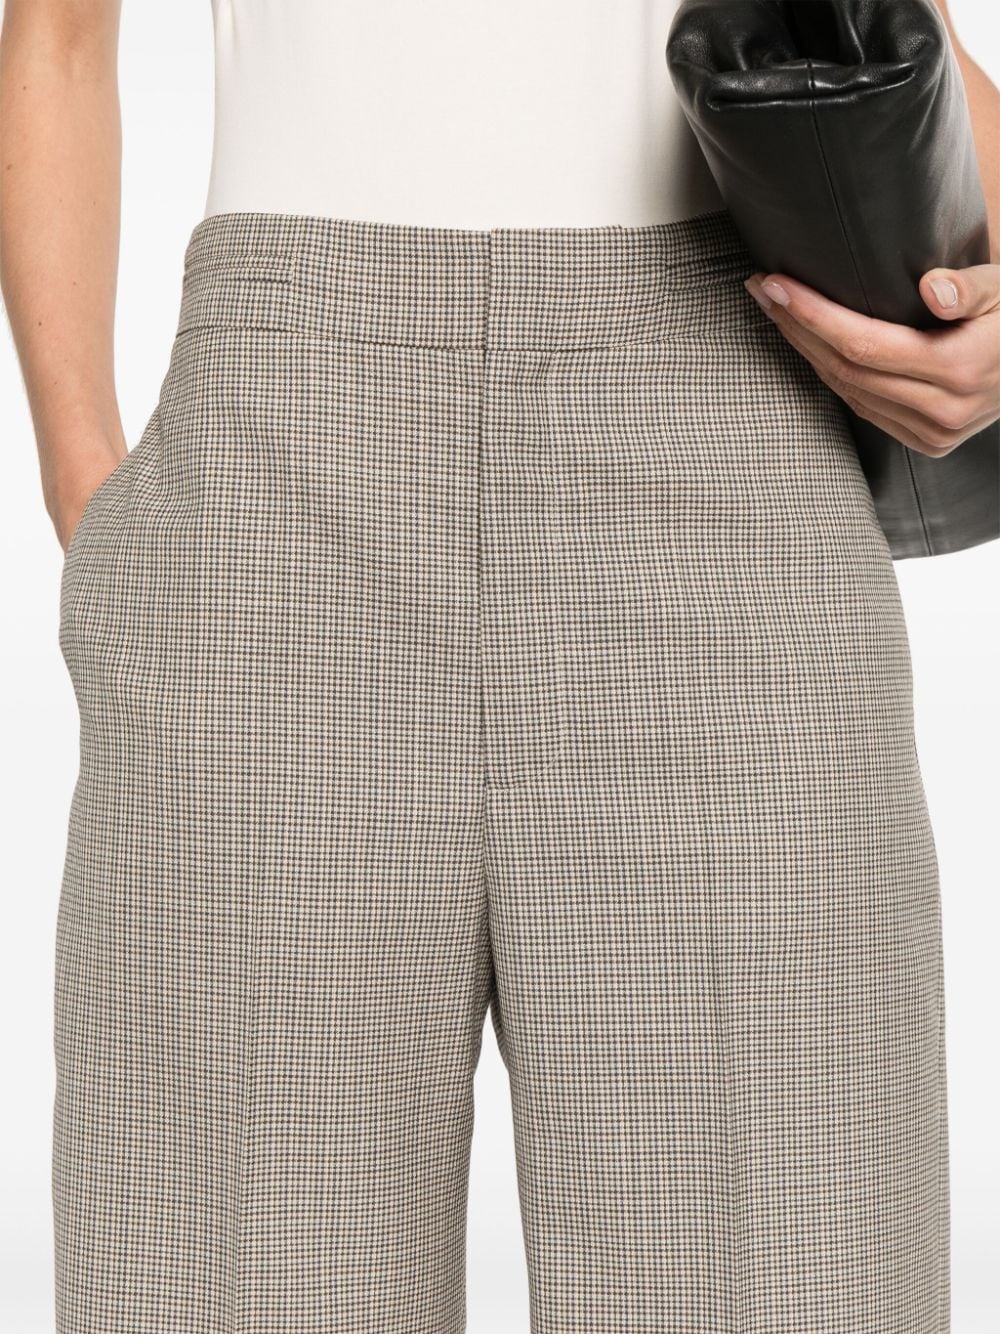 houndstooth-pattern tailored shorts - 5